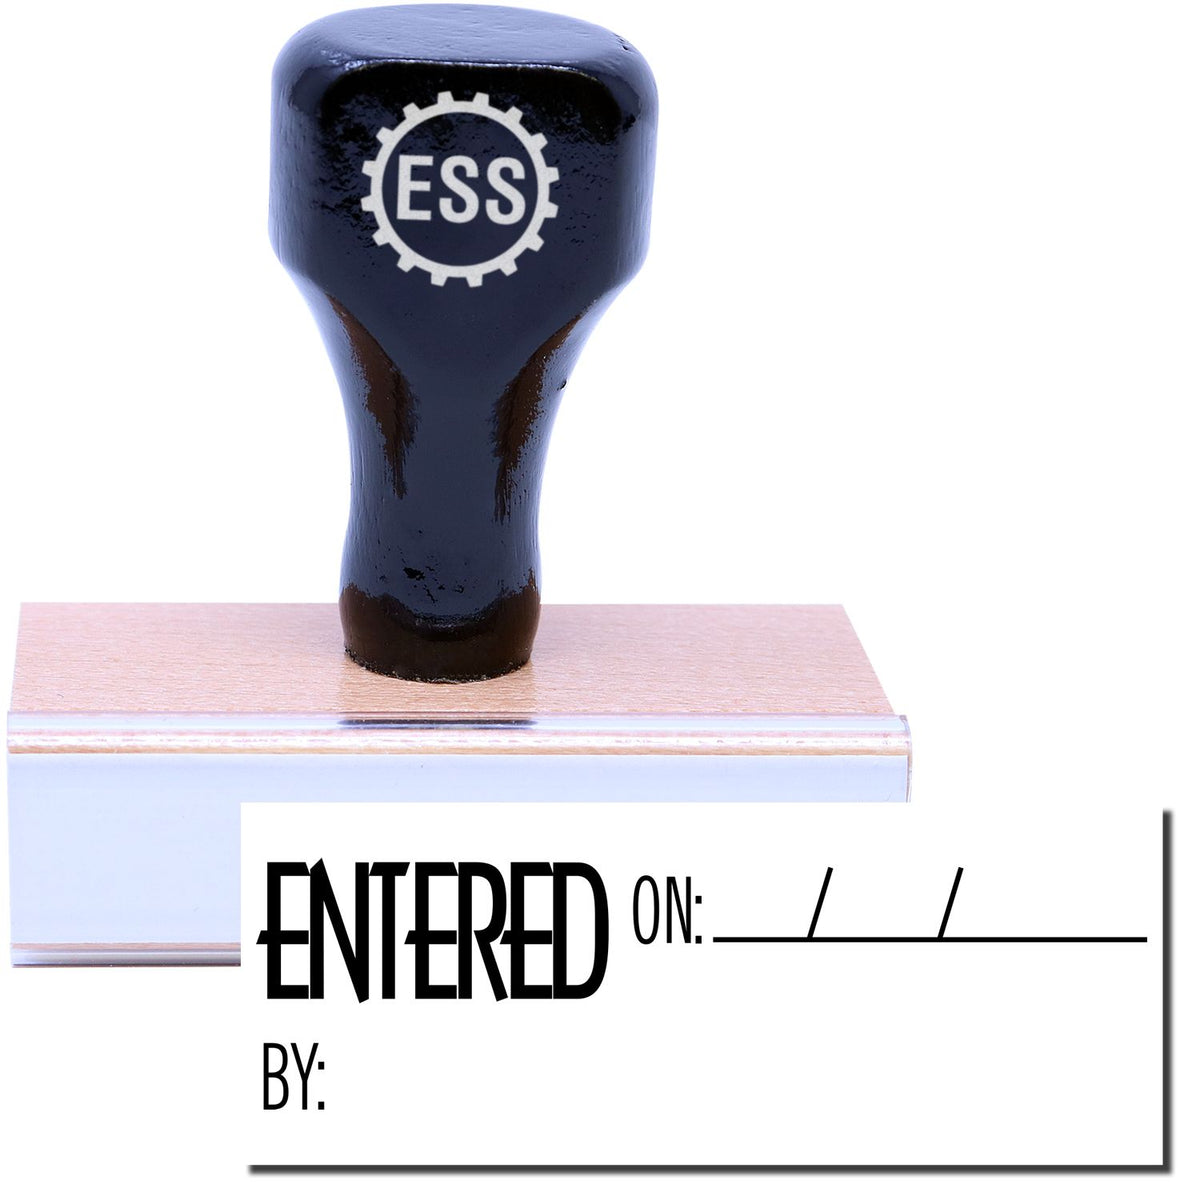 A stock office rubber stamp with a stamped image showing how the text &quot;ENTERED ON&quot; in a large font with a space for a date and the name of the person (&quot;BY:&quot;) who did the work is displayed after stamping.